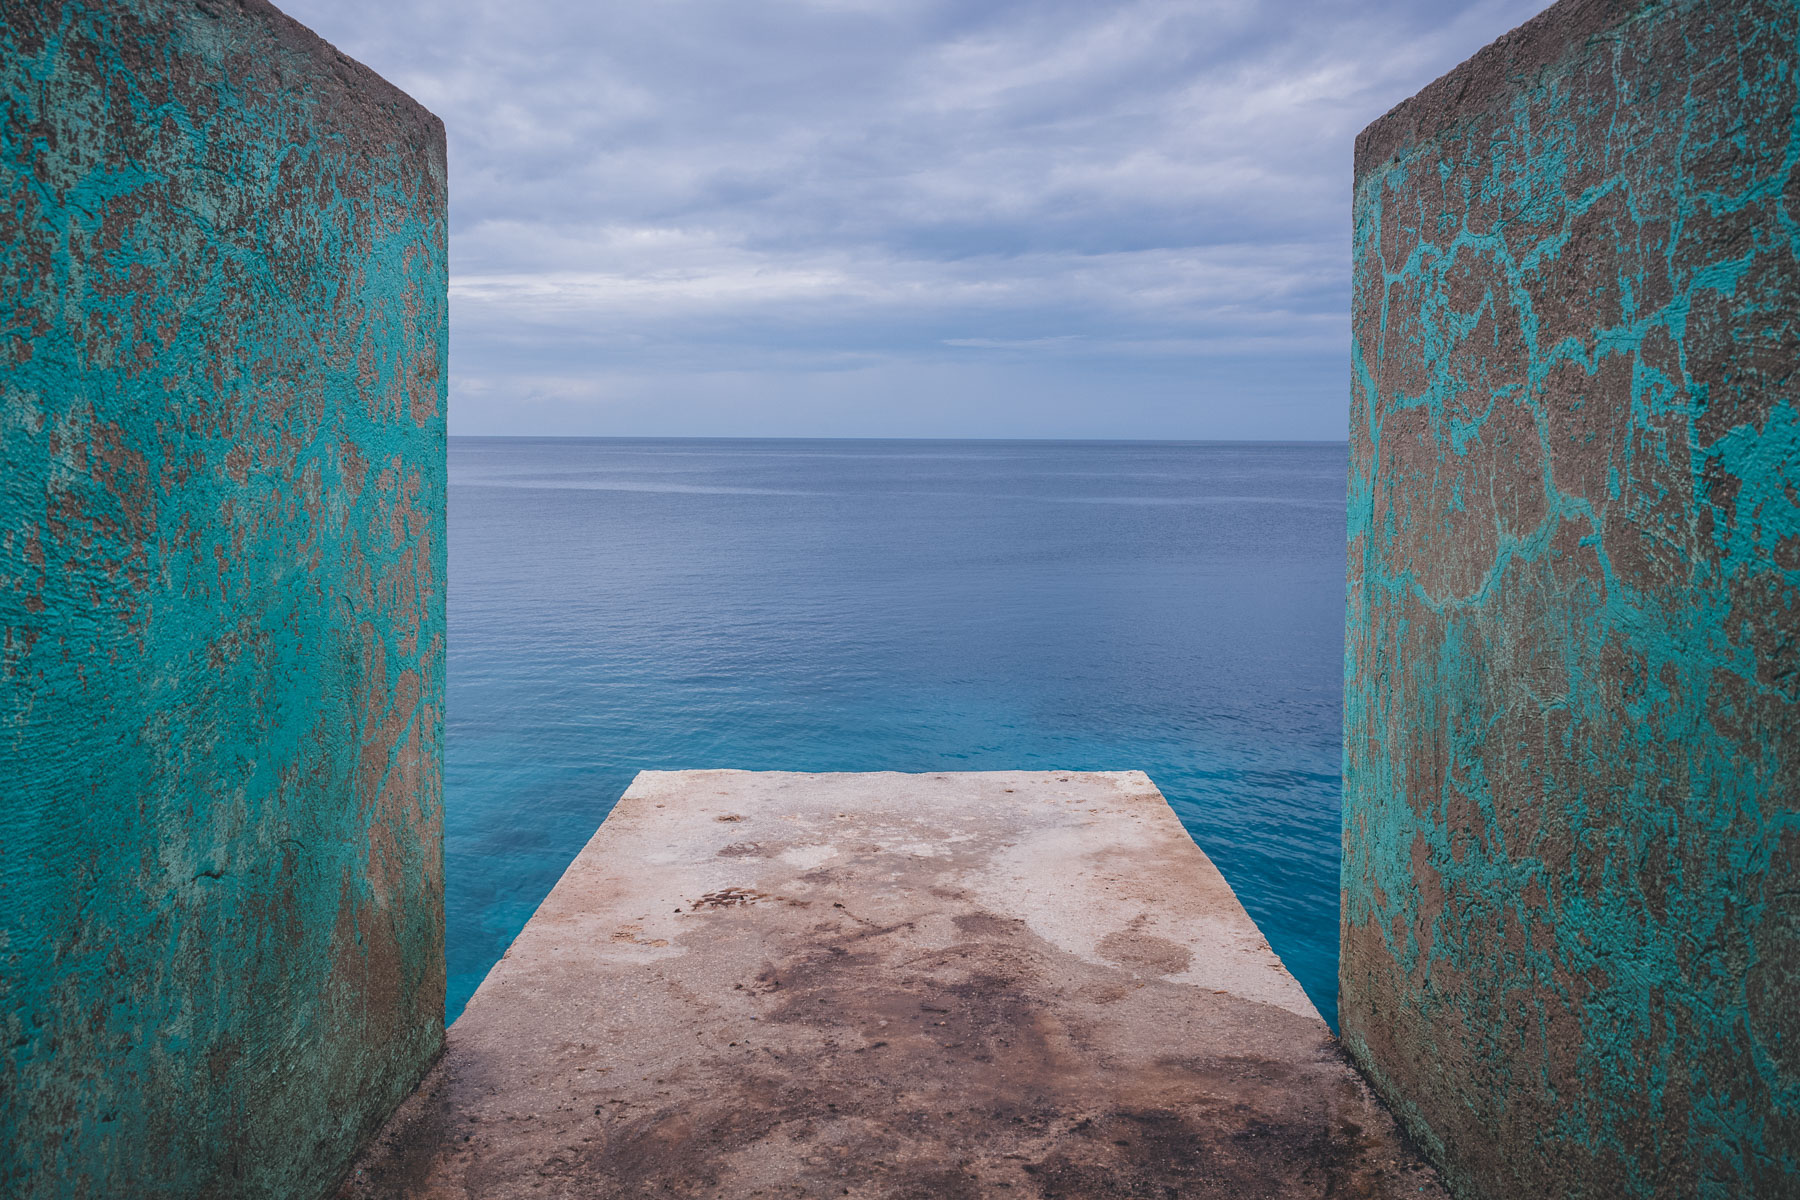 diving board view over the sea in the Philippines